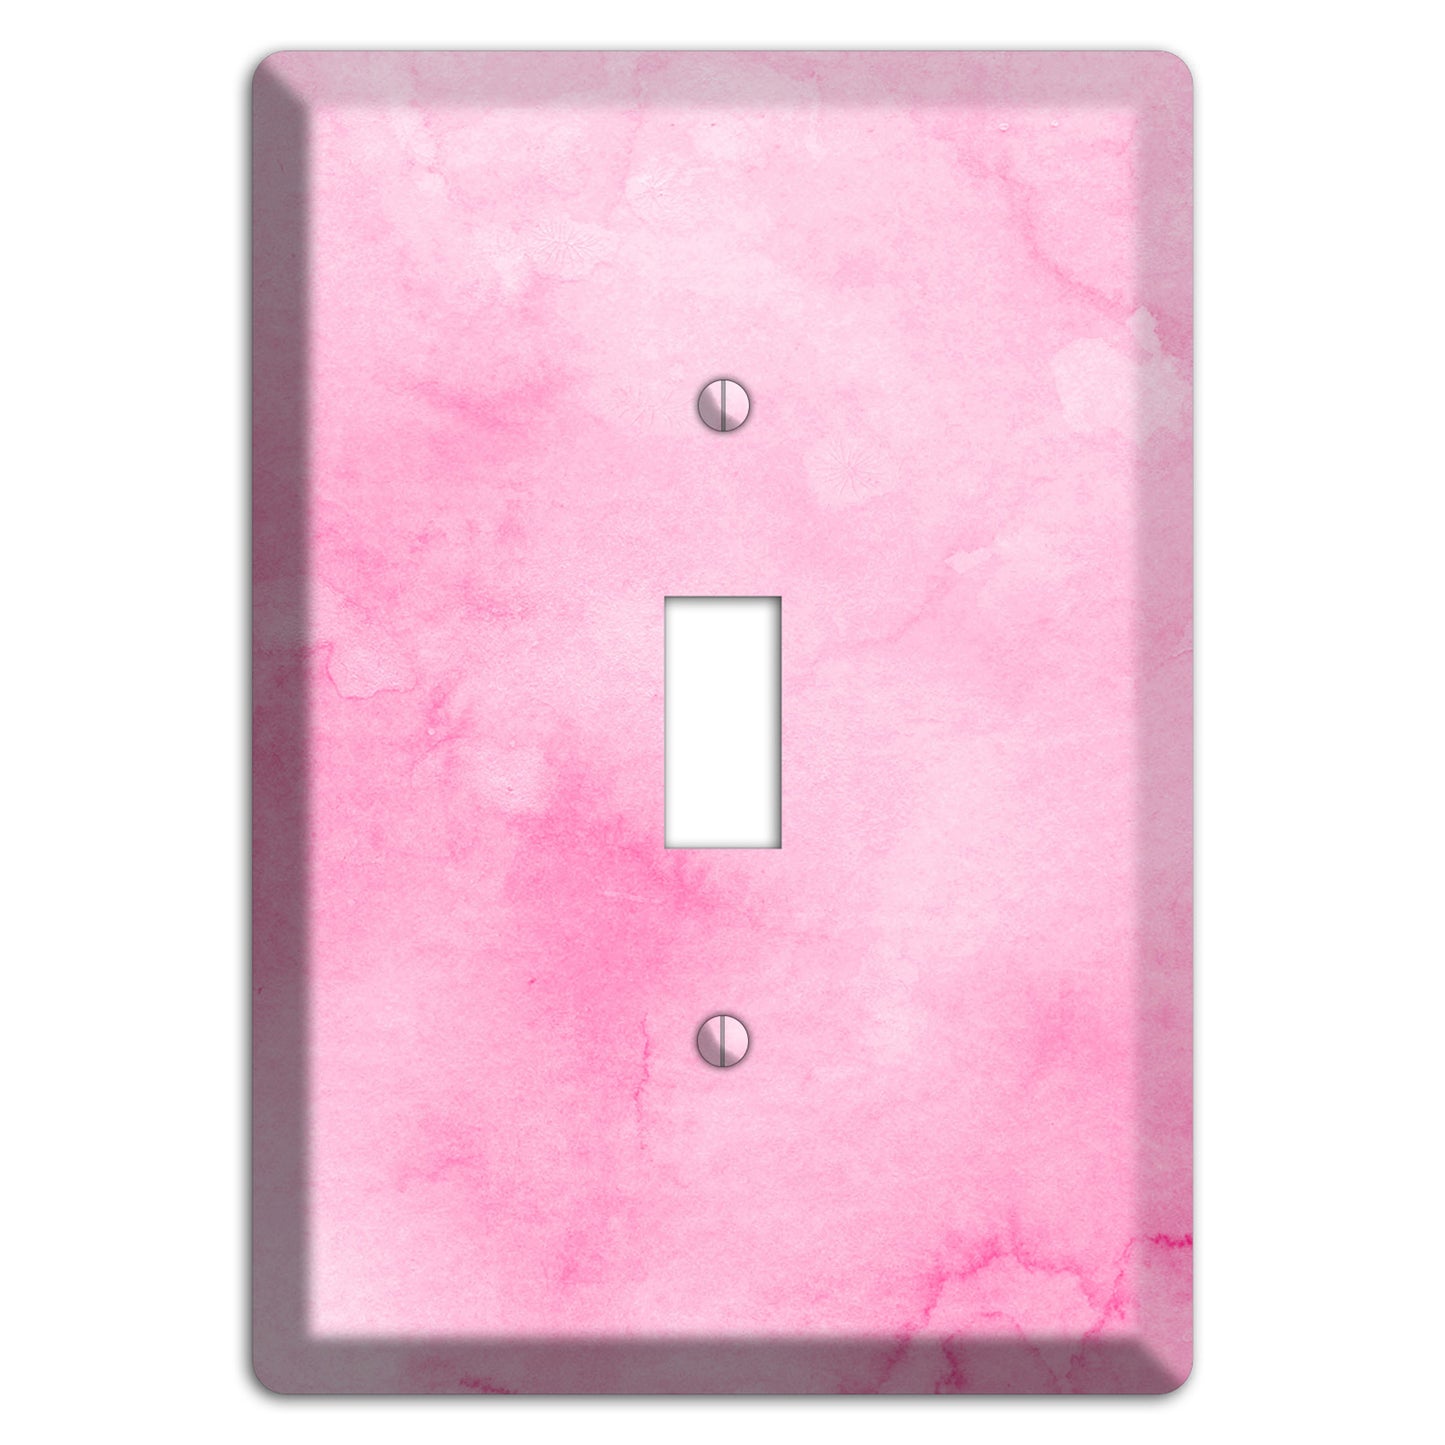 Cinderella Pink Texture Cover Plates